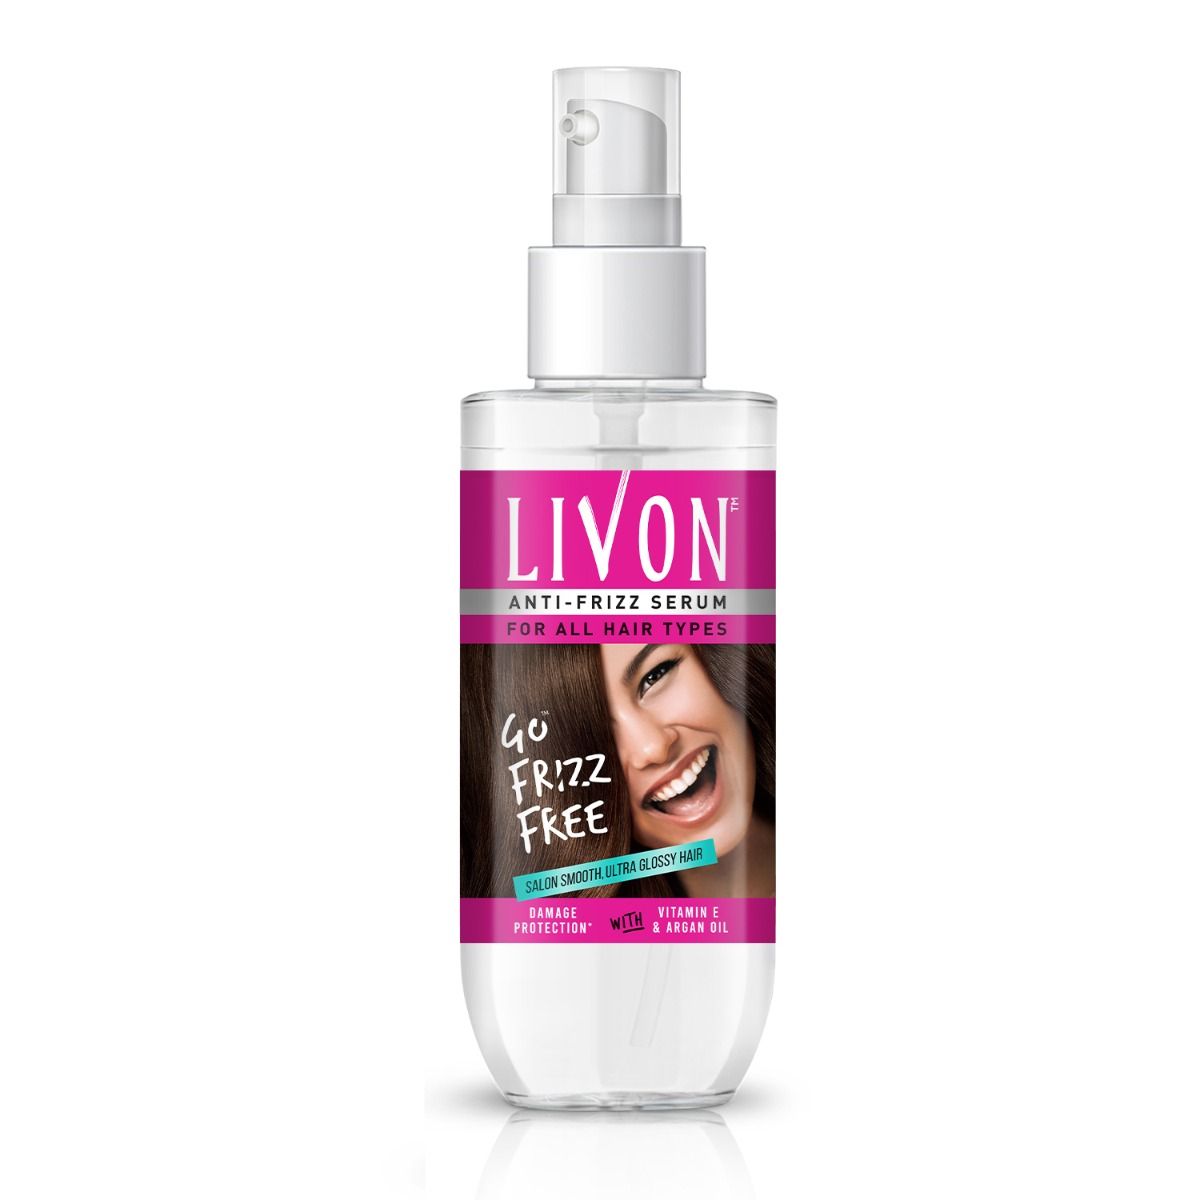 Livon Anti-Frizz Serum For All Hair Types, 50 ml Price, Uses, Side Effects,  Composition - Apollo Pharmacy